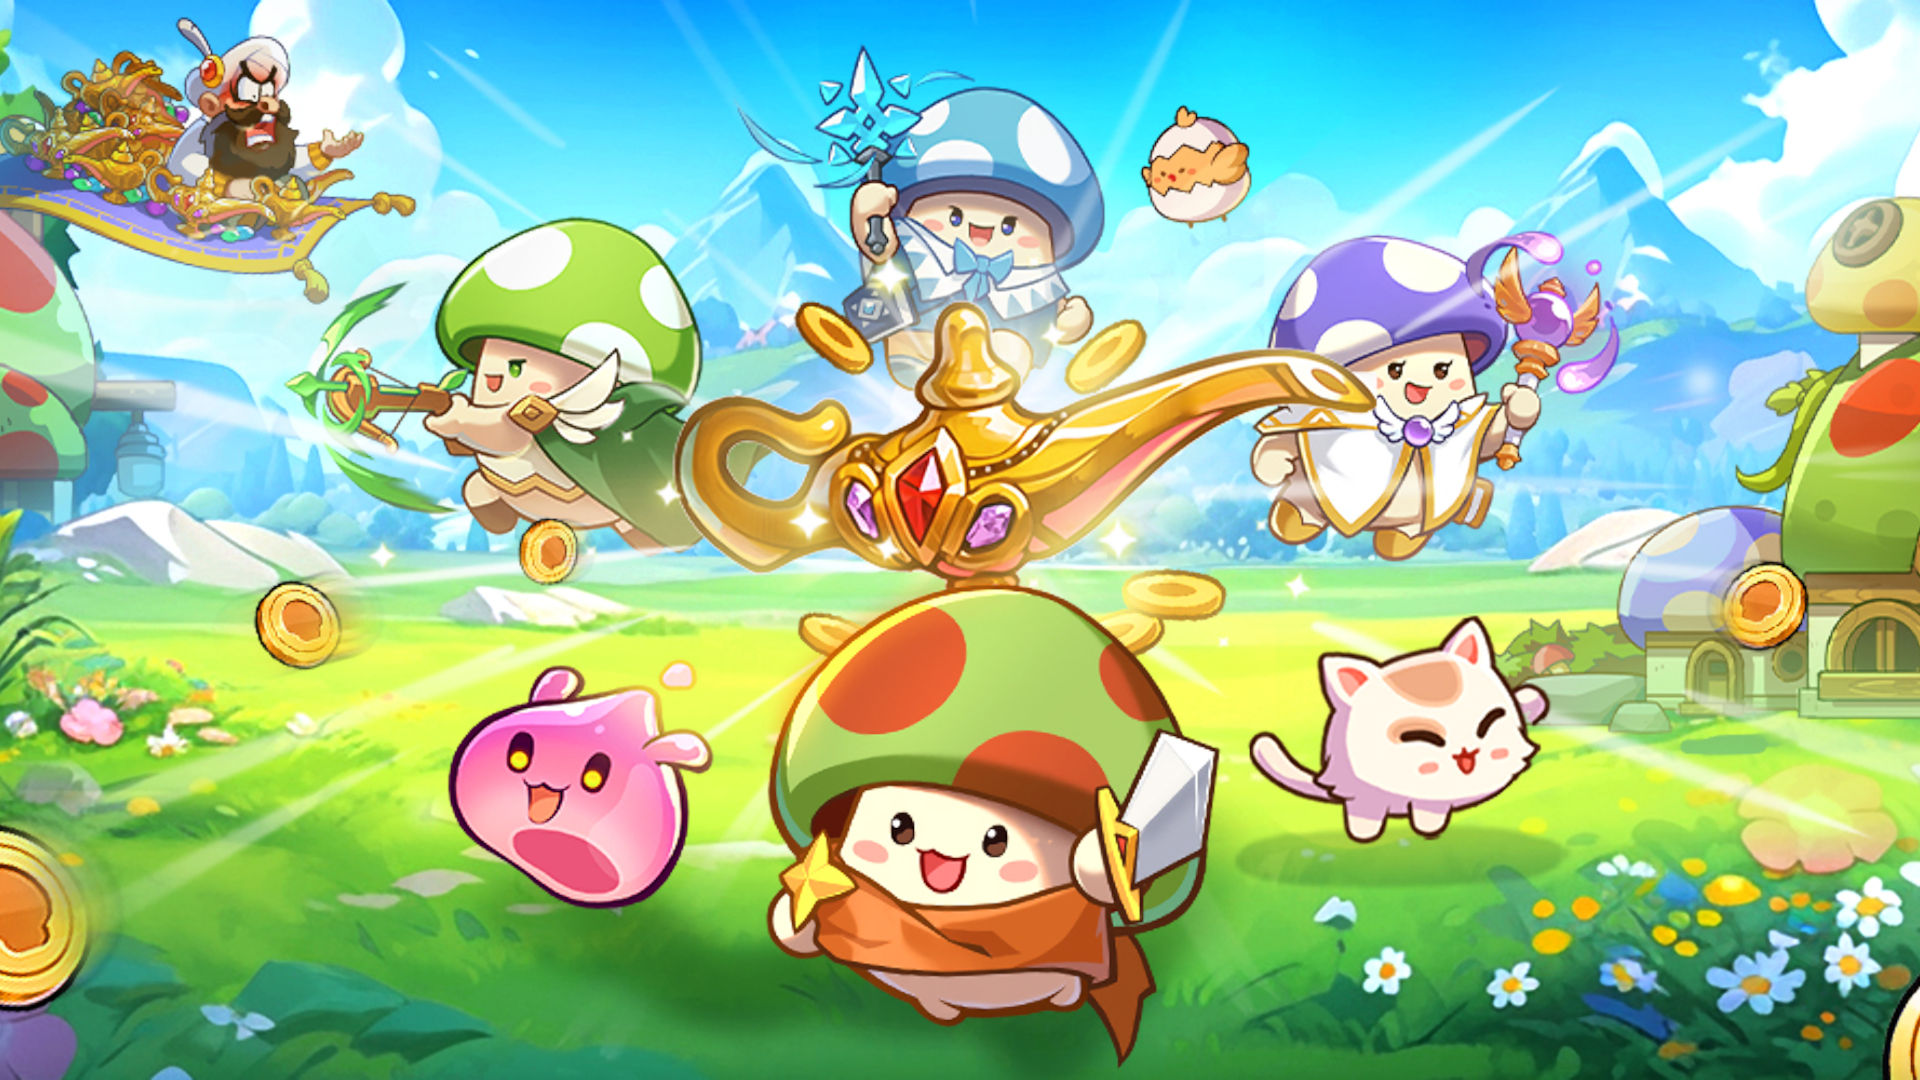 Art from one of the best mobile RPGs, Legend of Mushroom, showing a bunch of mushrooms and cute critters charging into battle